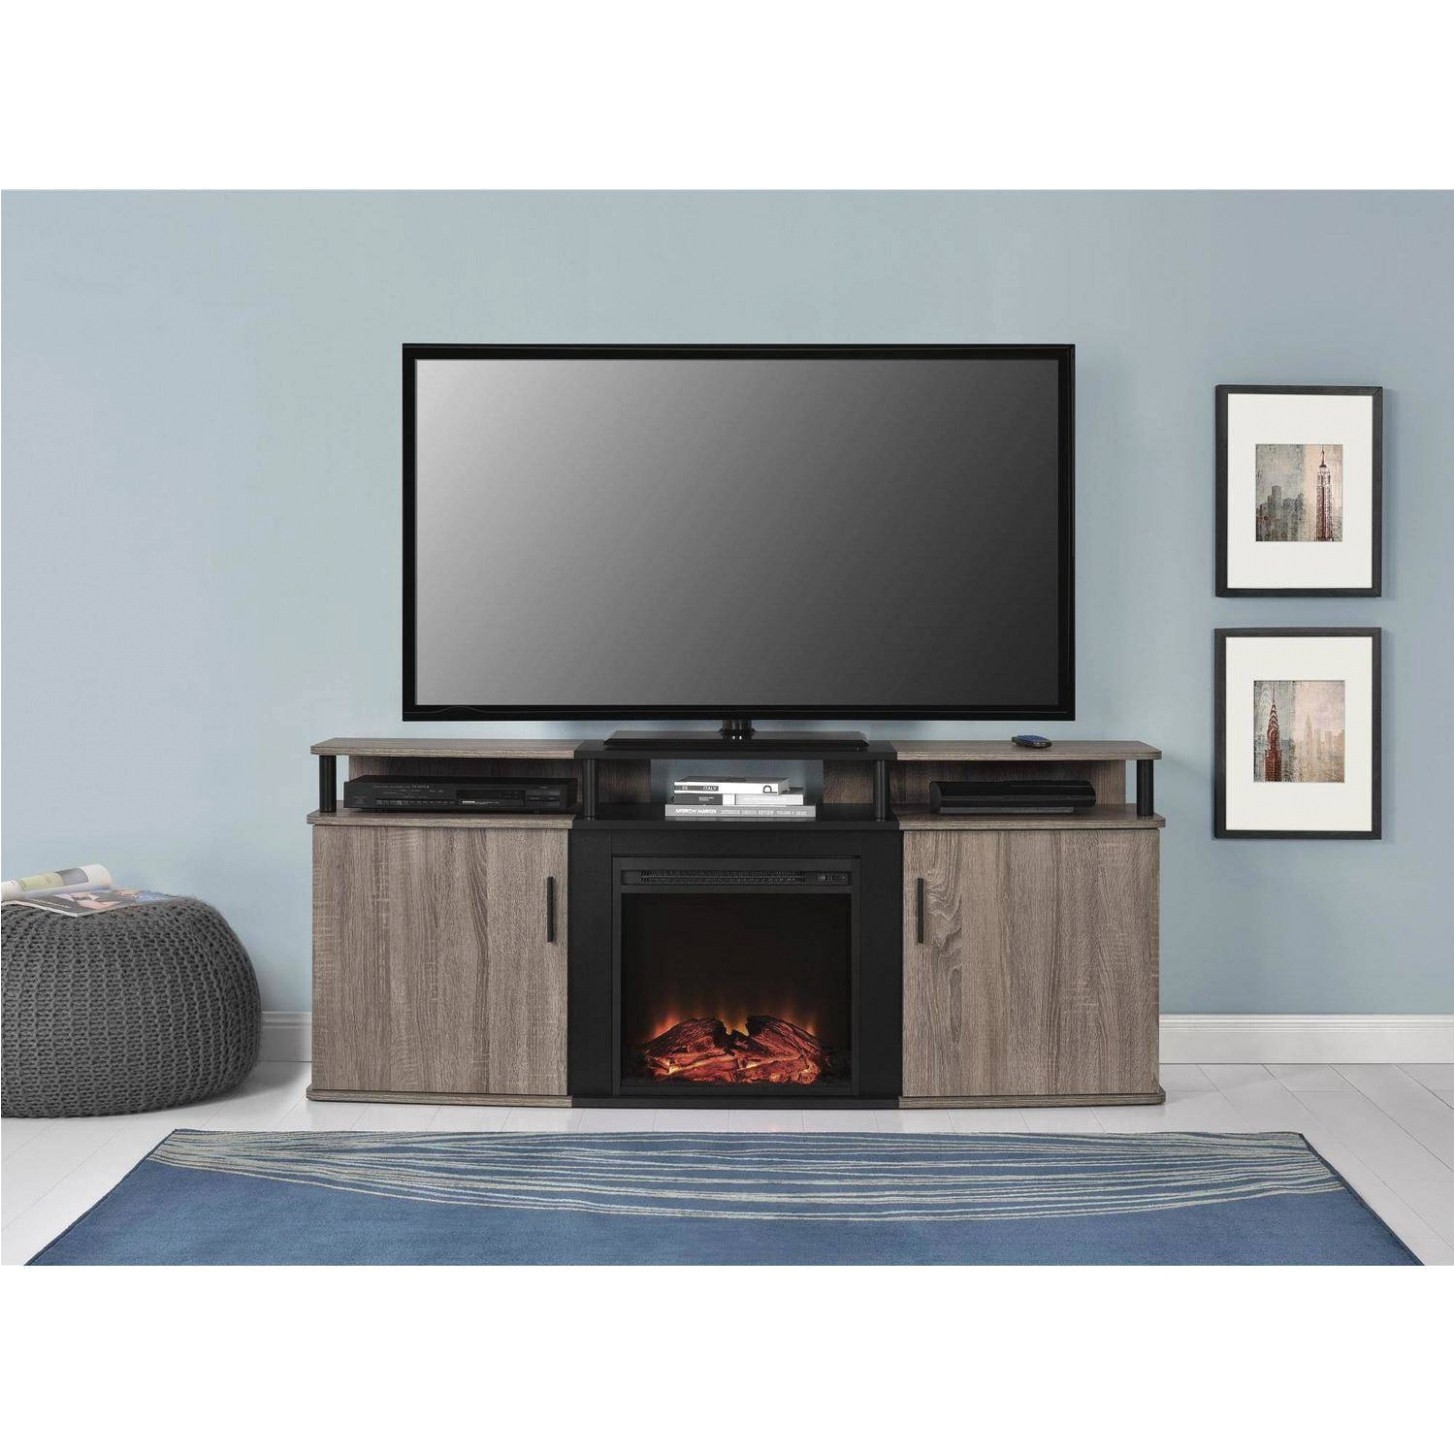 electric fireplaces at walmart canada electric fireplace walmart canada lovely fireplace tv stands of electric fireplaces at walmart canada